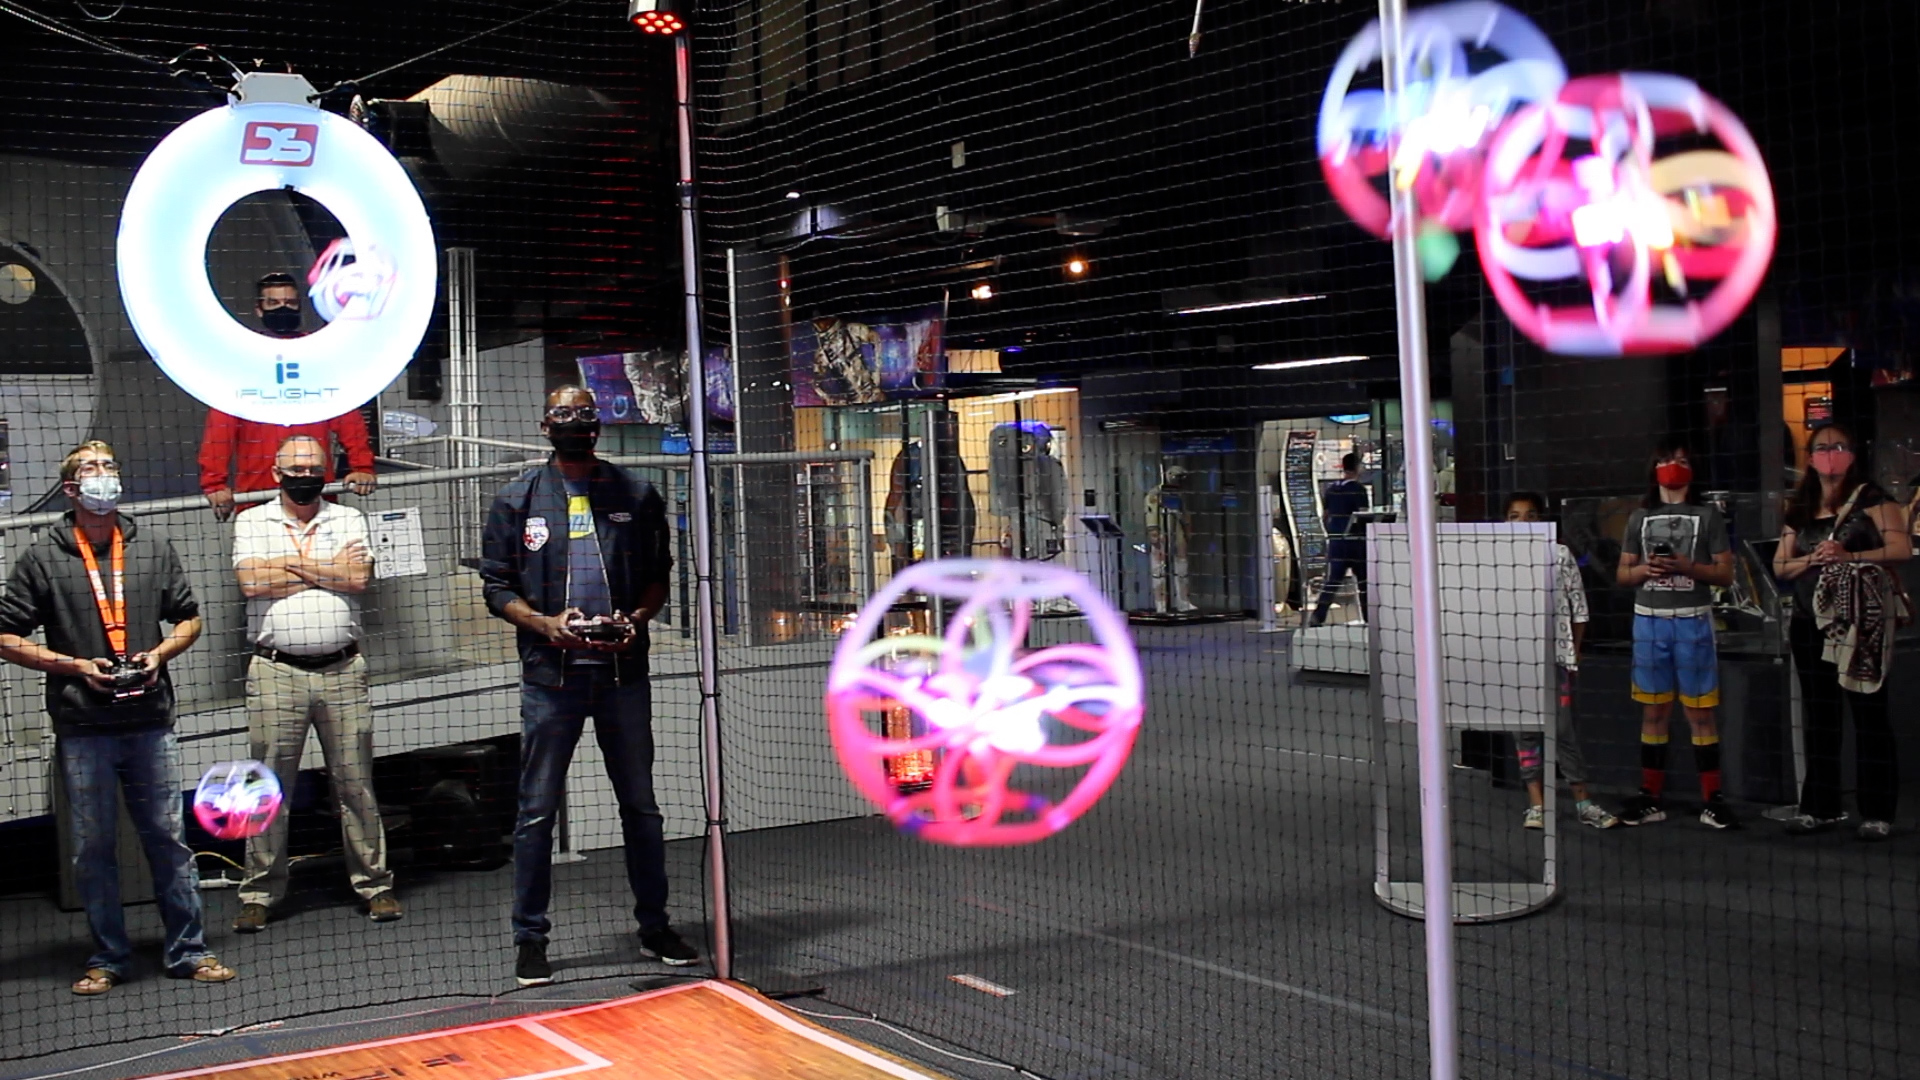 SPACE FOUNDATION GIVING VISITORS A CHANCE TO PLAY QUIDDITCH WITH DRONES